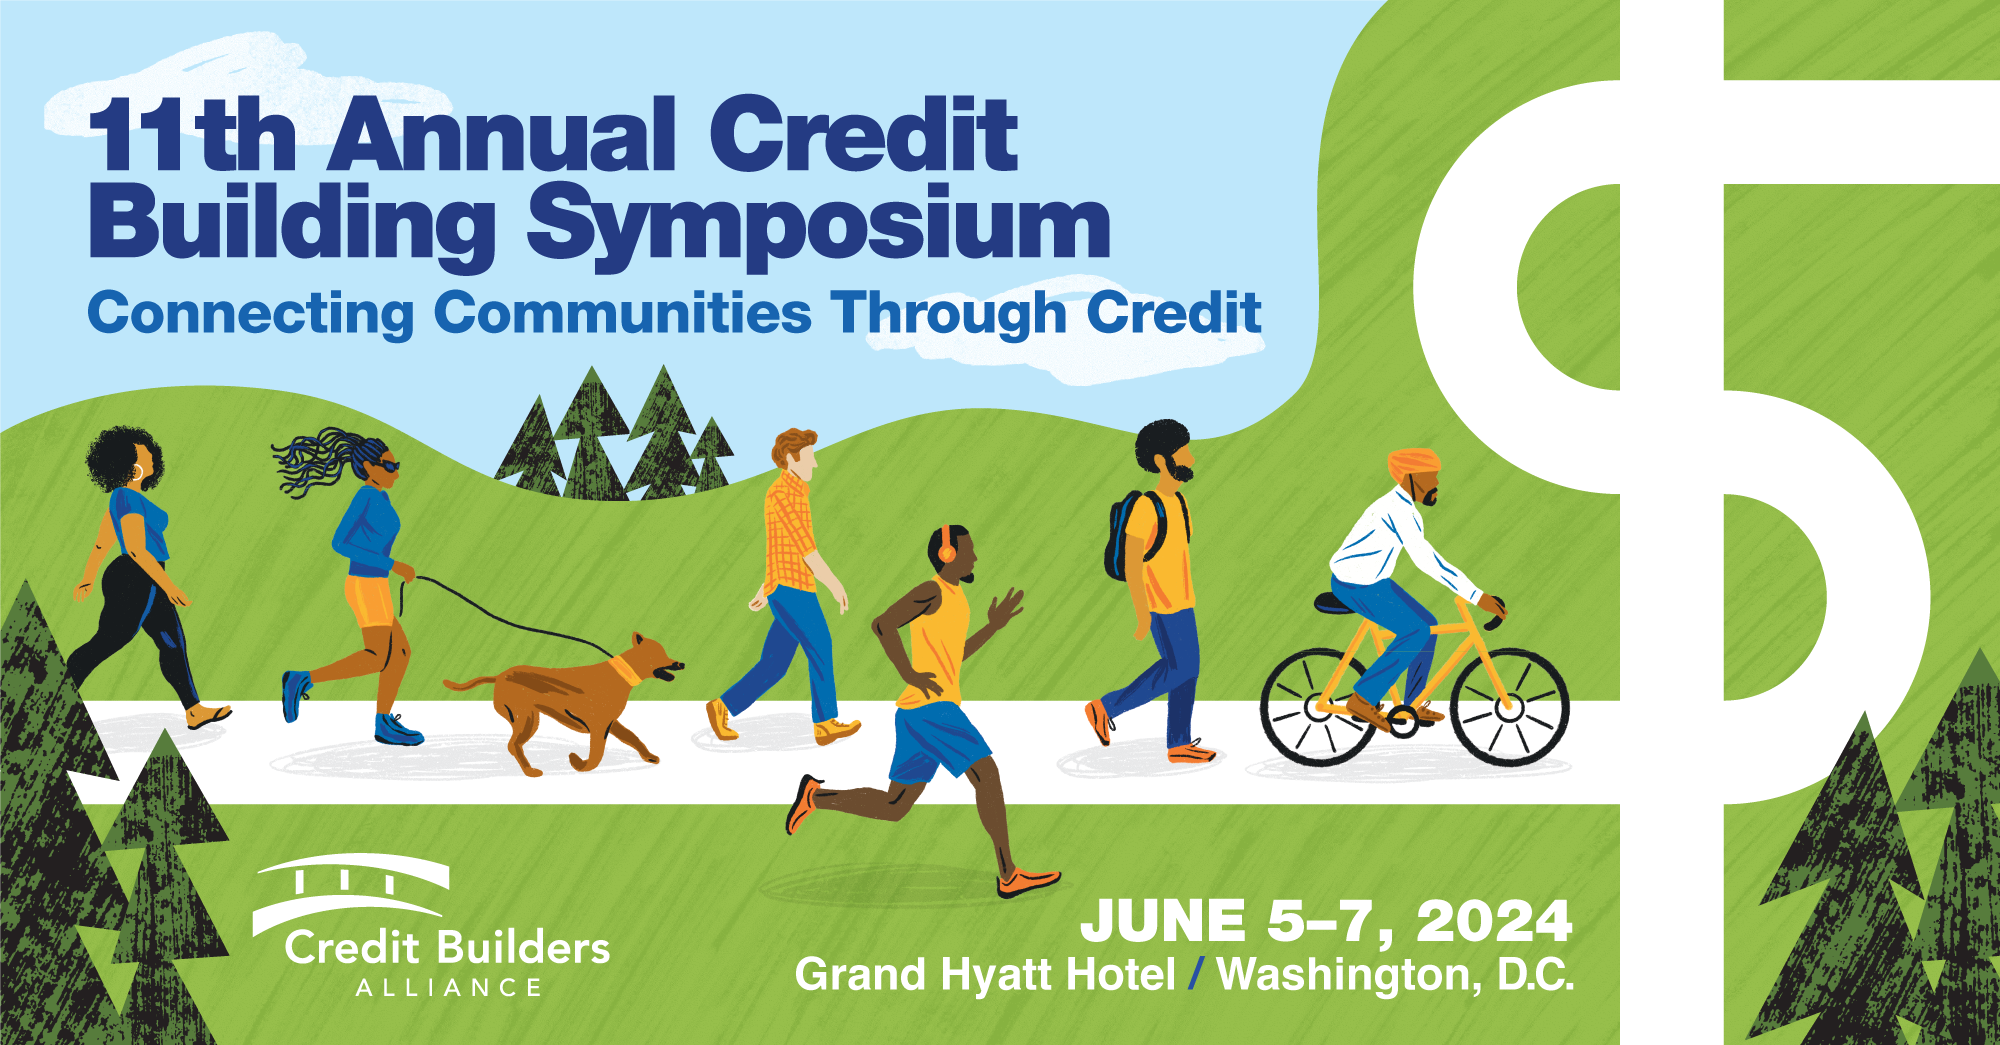 11th Annual Credit Building Symposium. Theme is connecting communities through credit. Dates are June 5-7, 2024. Location is Grand Hyatt Hotel - Washington DC